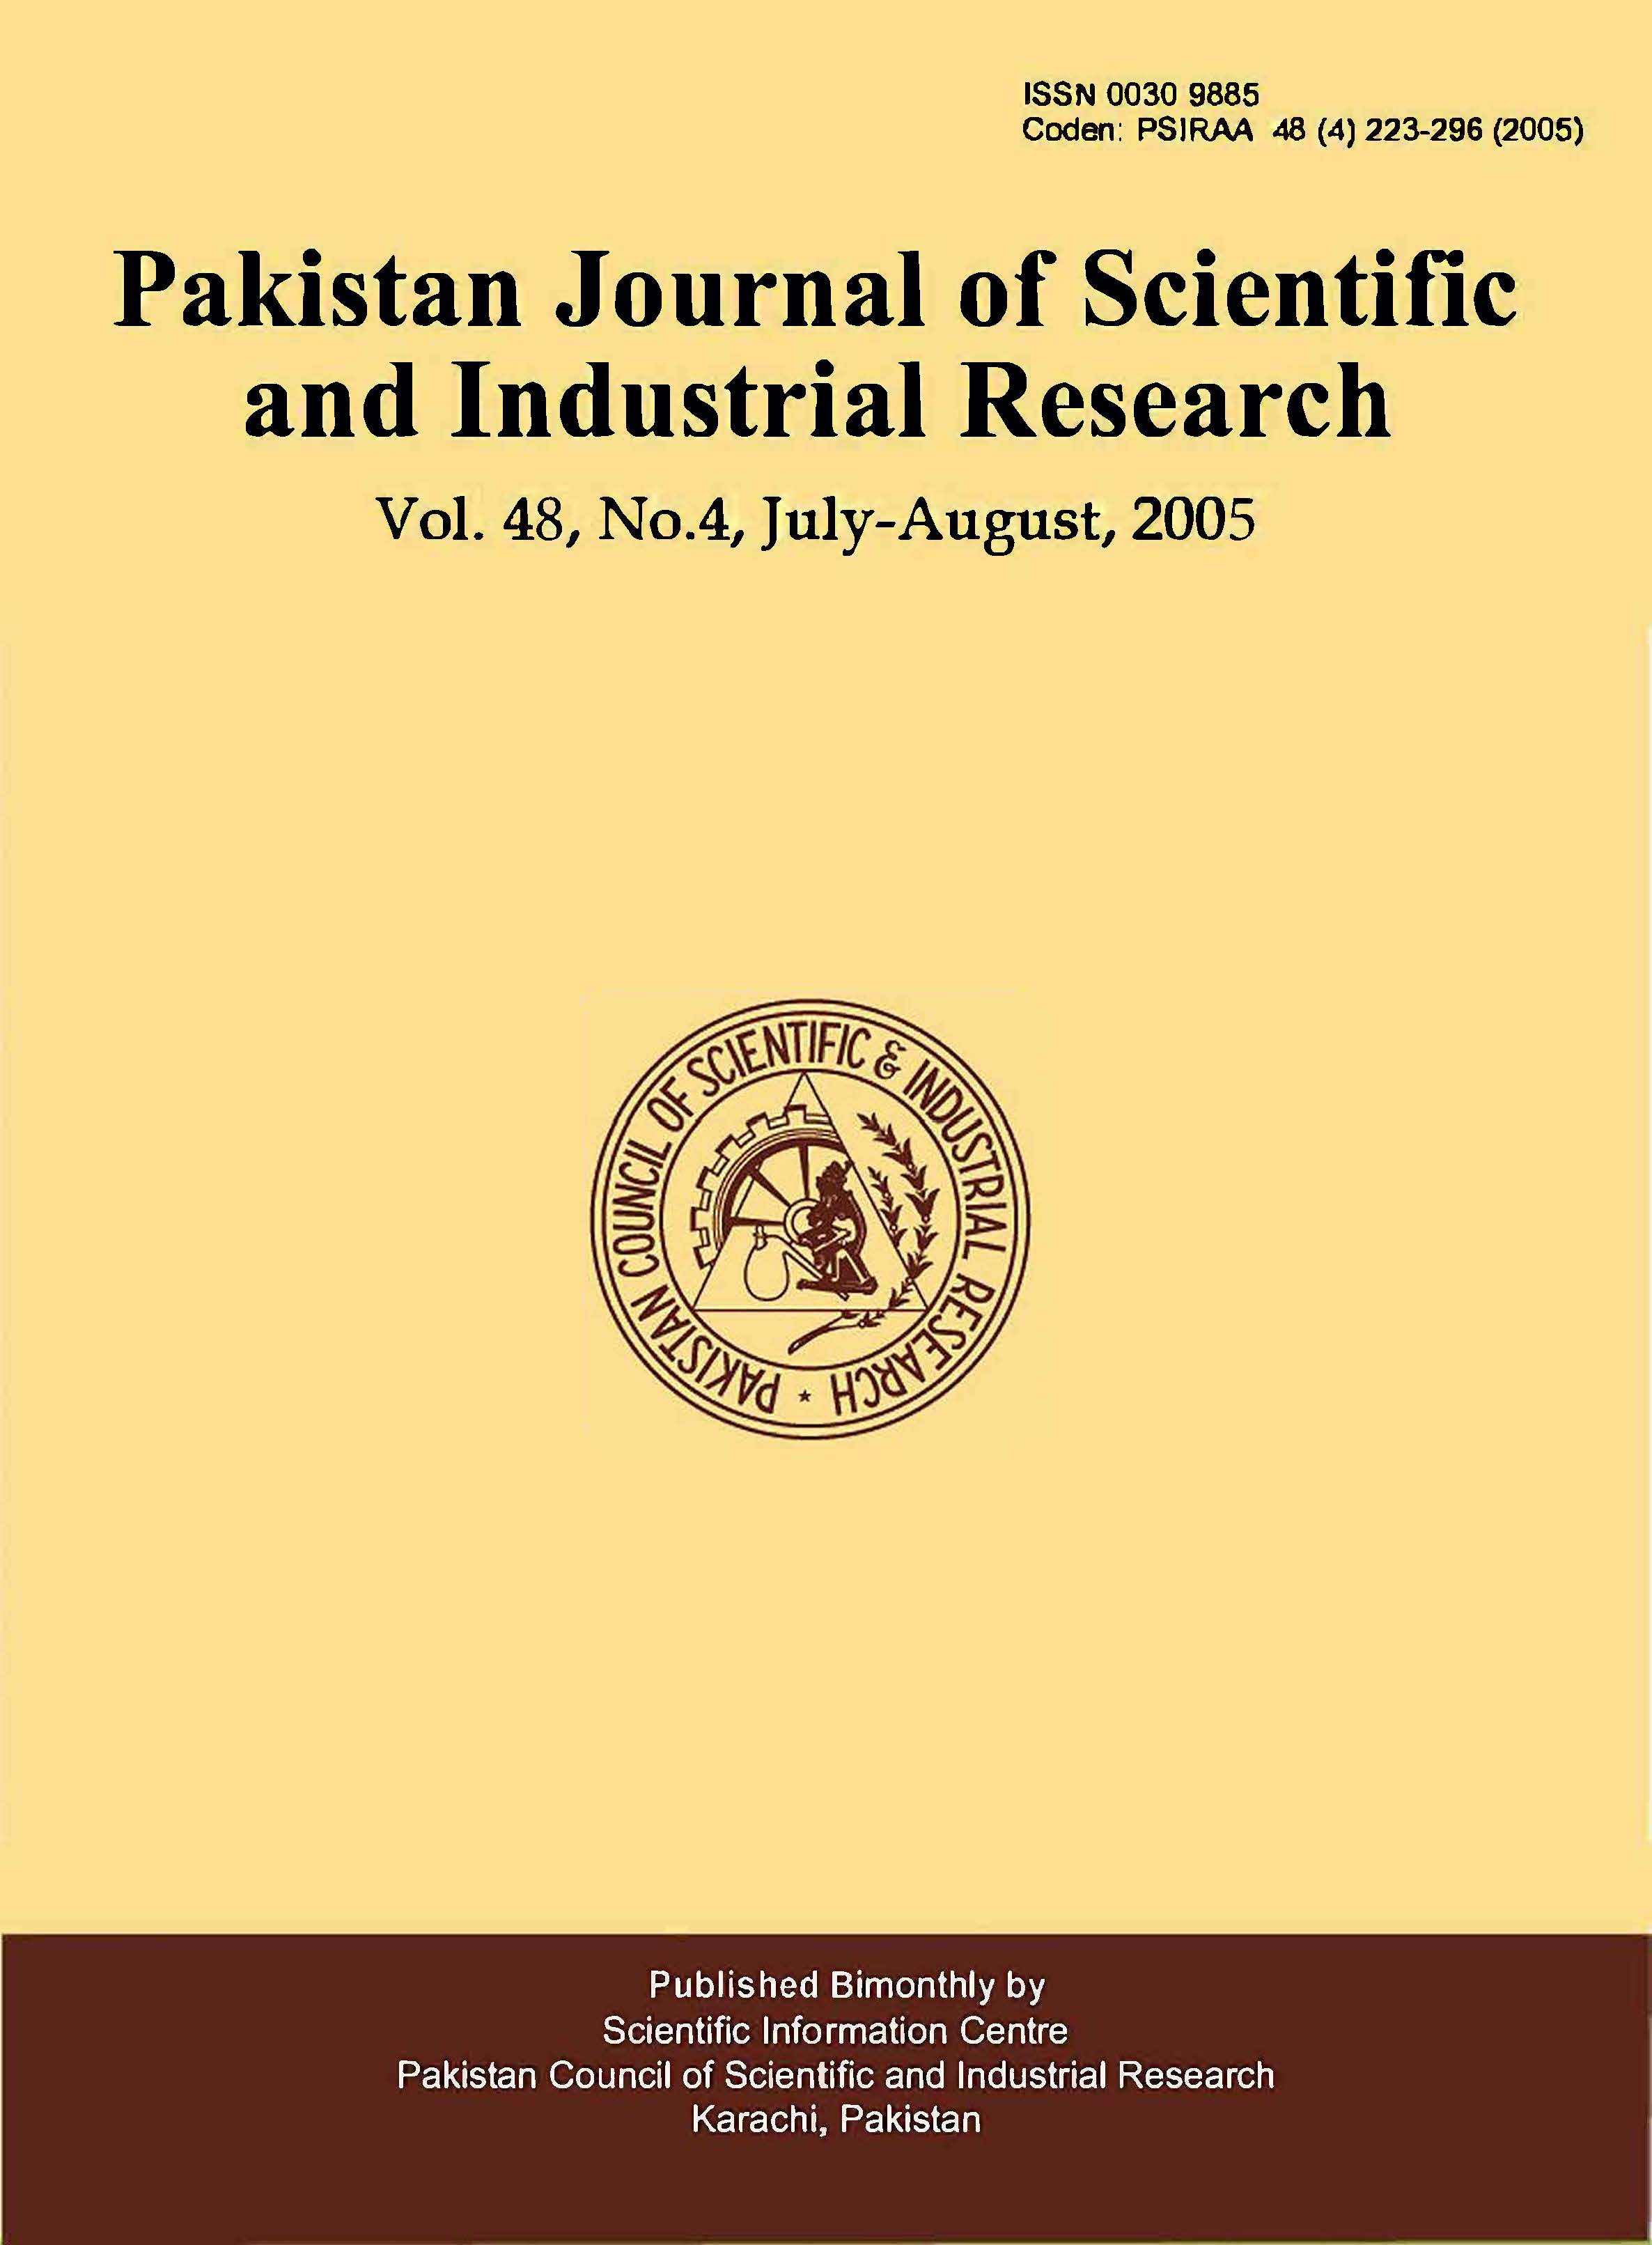 					View Vol. 48 No. 4 (2005): Pakistan Journal of Scientific and Industrial Research
				